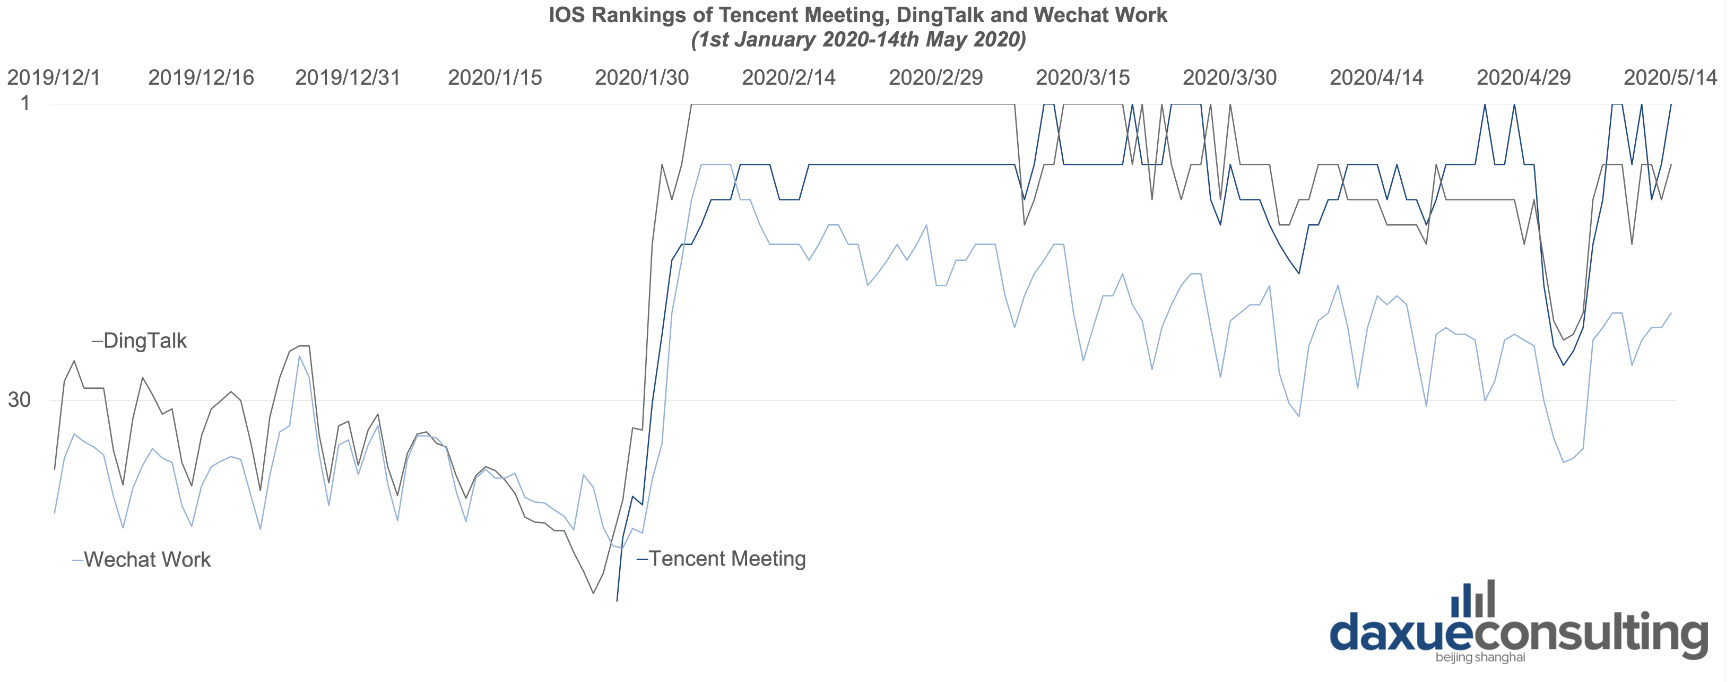 App store rankings of Remote conference tools in China